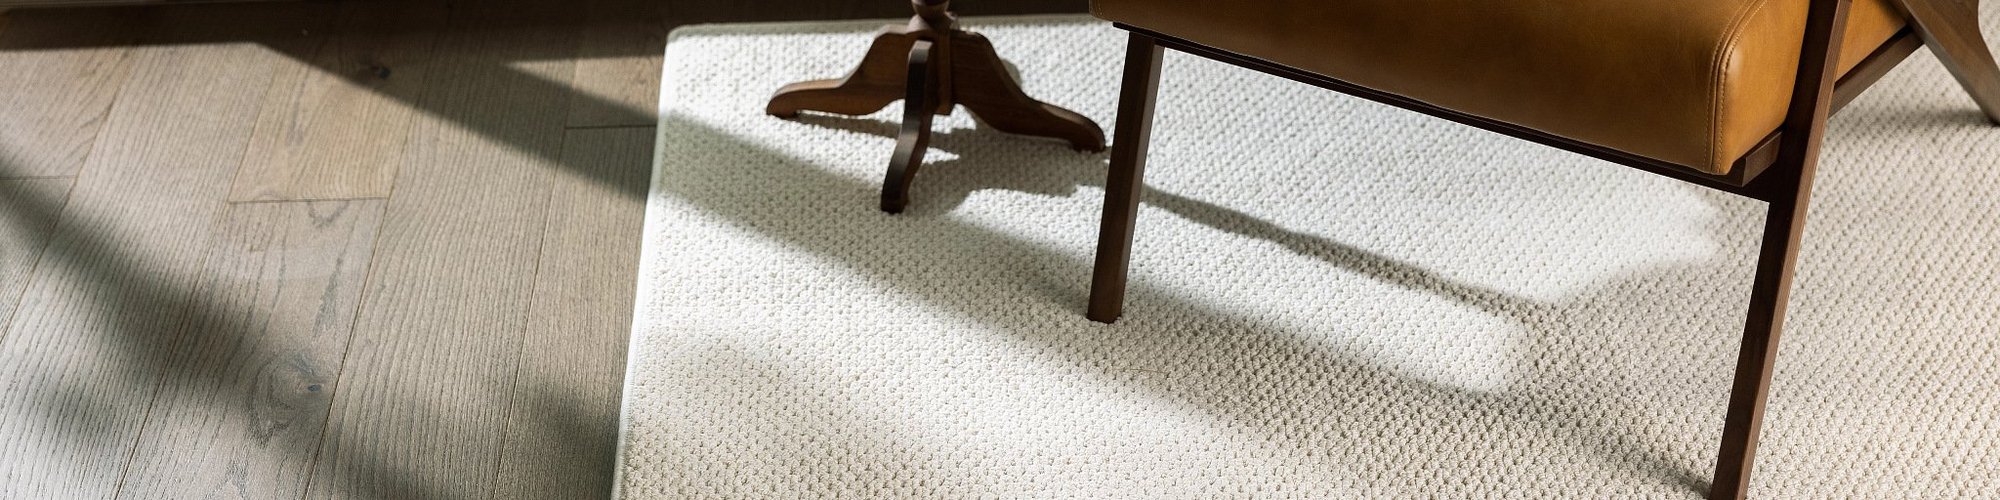 Chair and table on the rug - Mac's Custom Flooring in Redlands